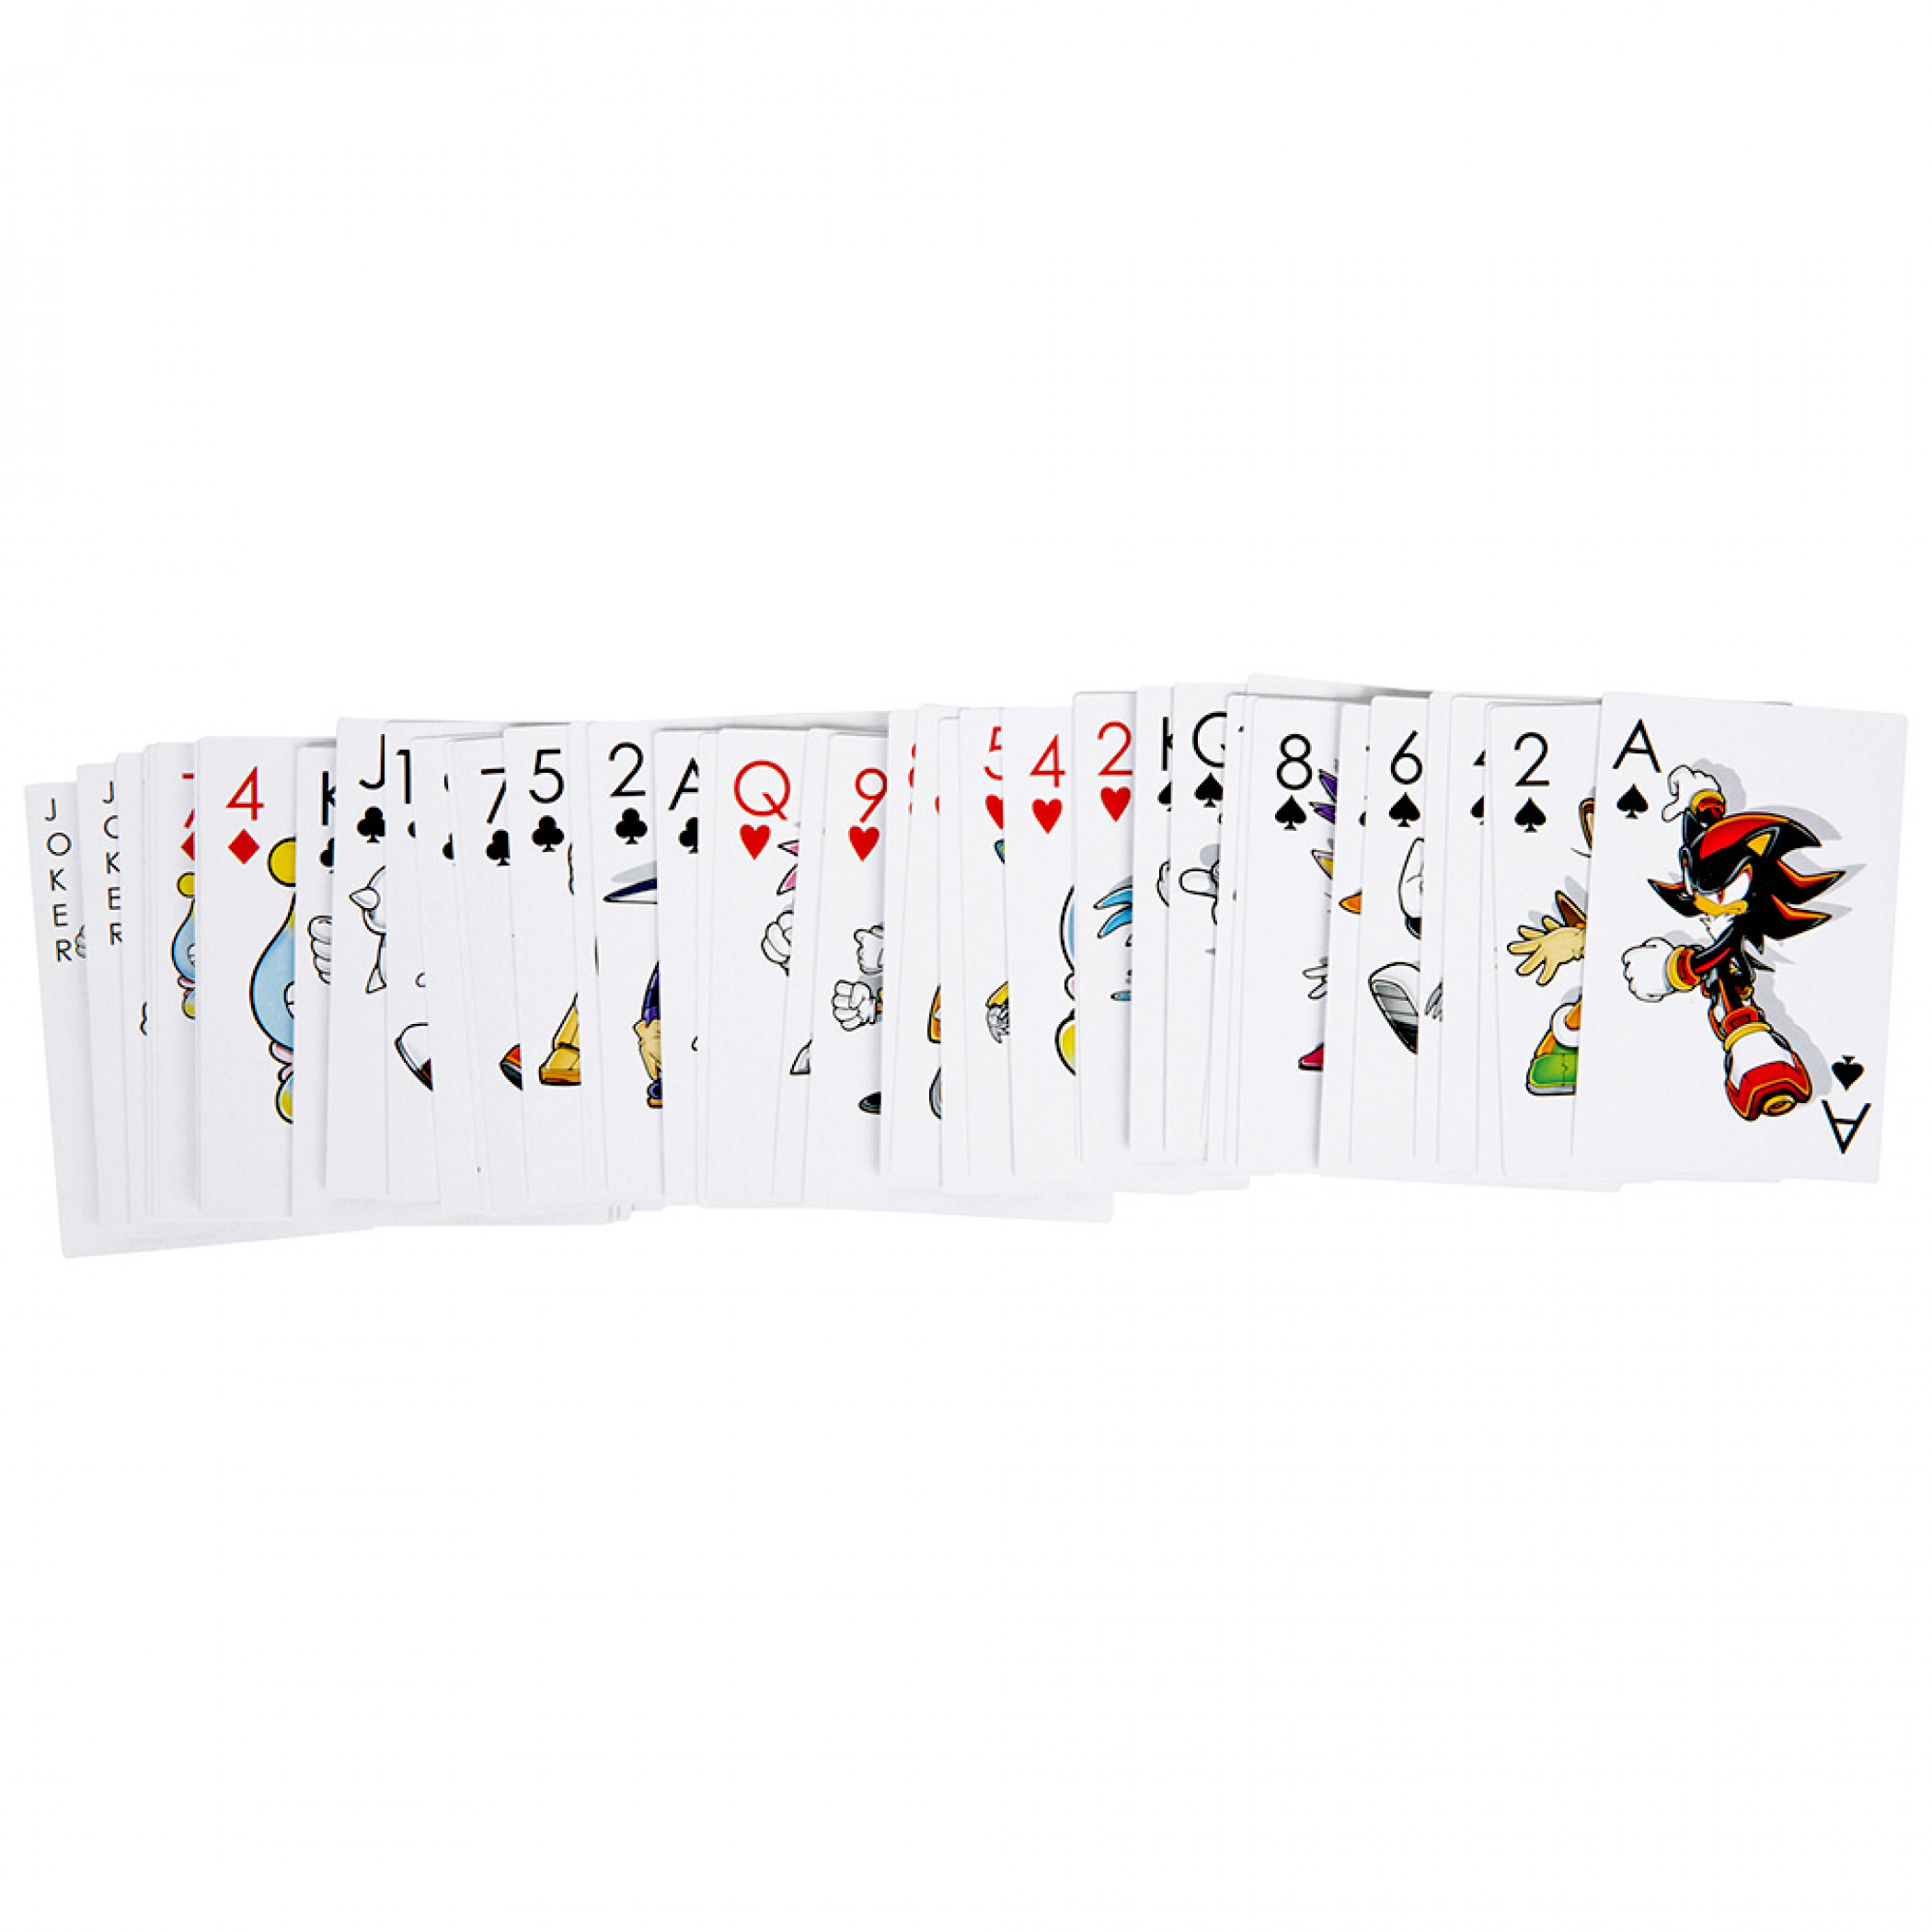 Sonic The Hedgehog Playing Card Deck